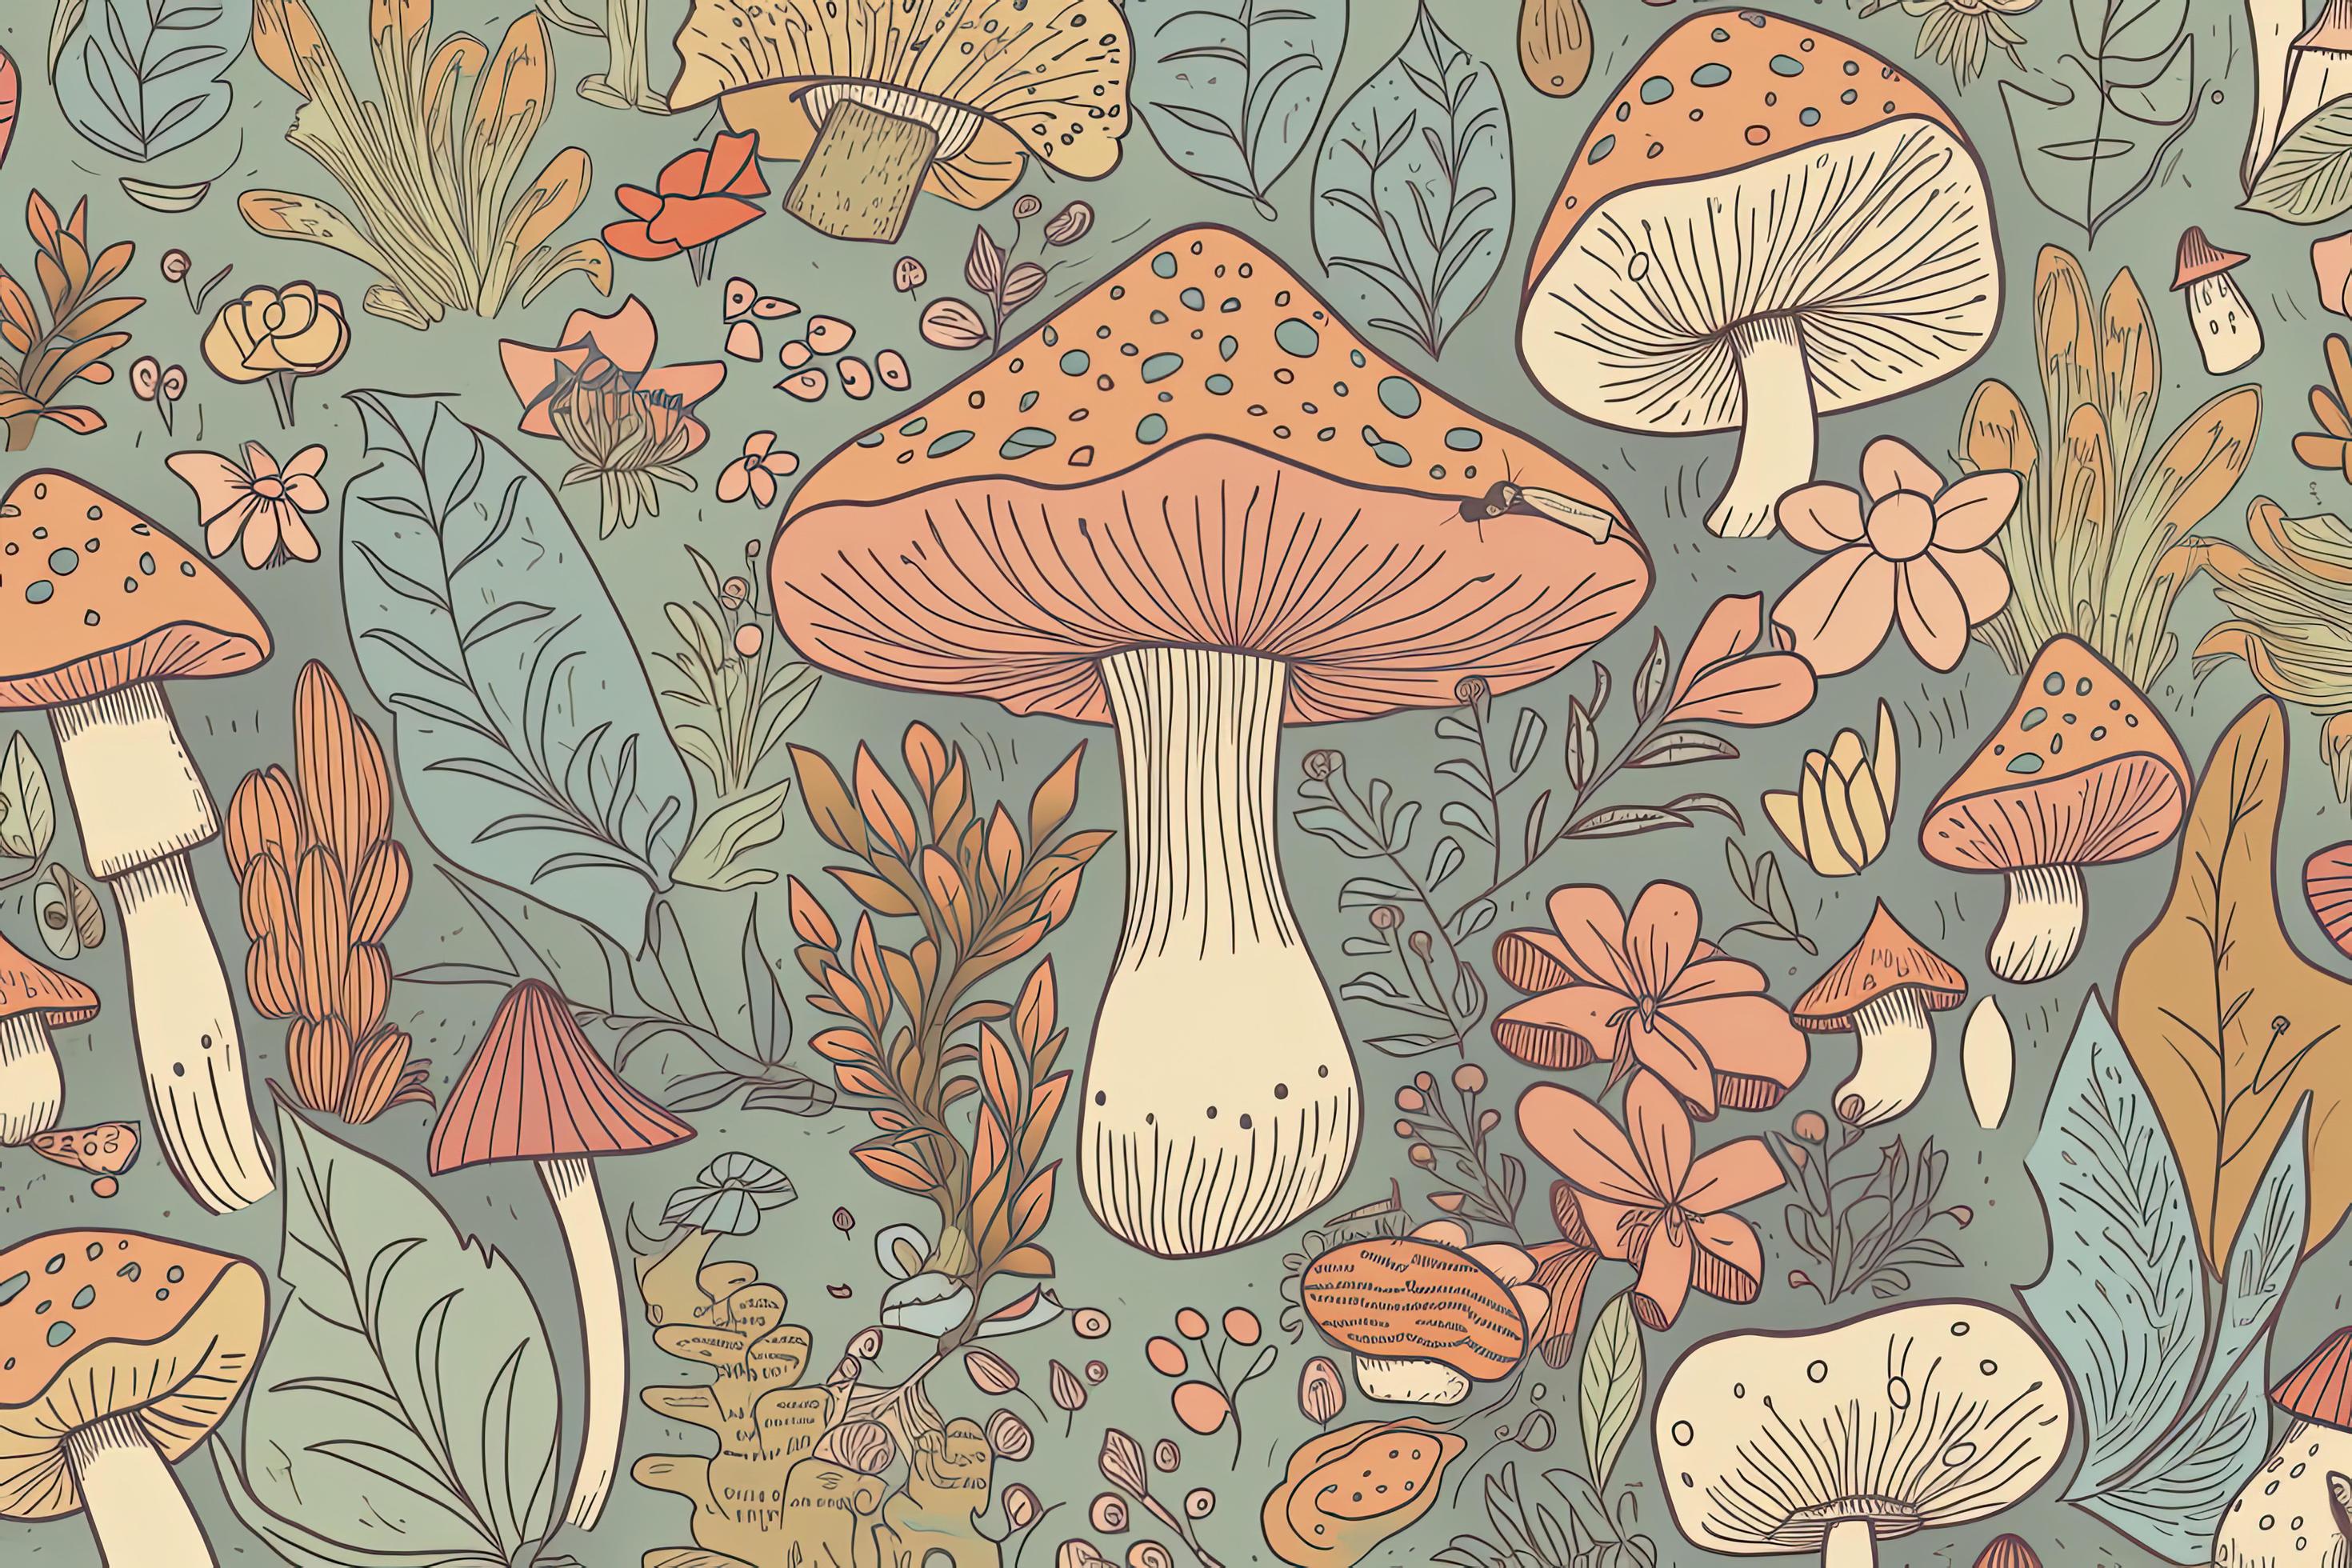 Dark Academia Cottagecore Aesthetic Magical Mushroom Fungi  Poster for  Sale by KeenanGlover  Redbubble